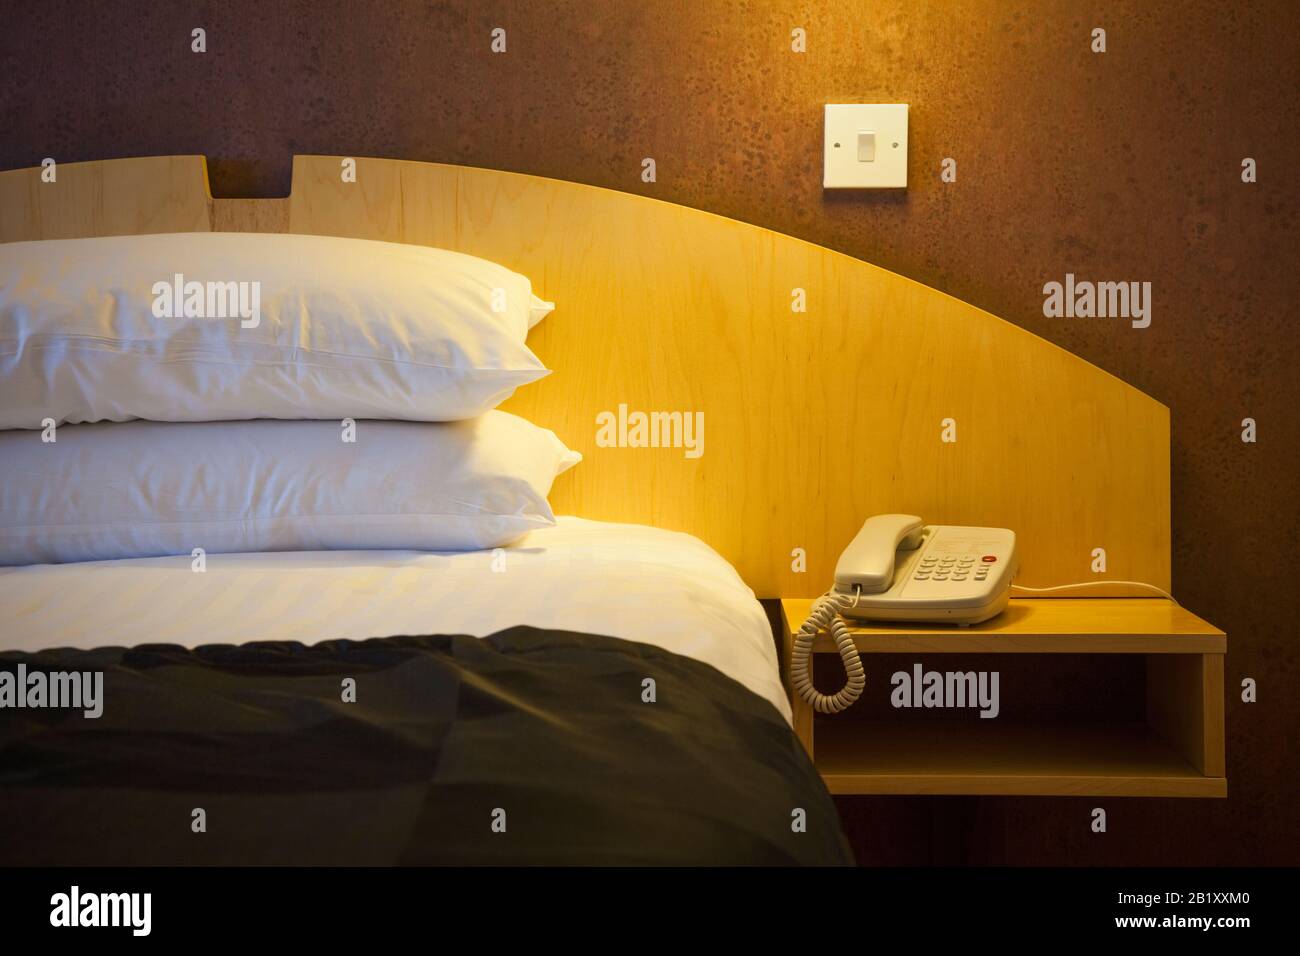 Illuminated hotel room bed with bedside telephone at night Stock Photo